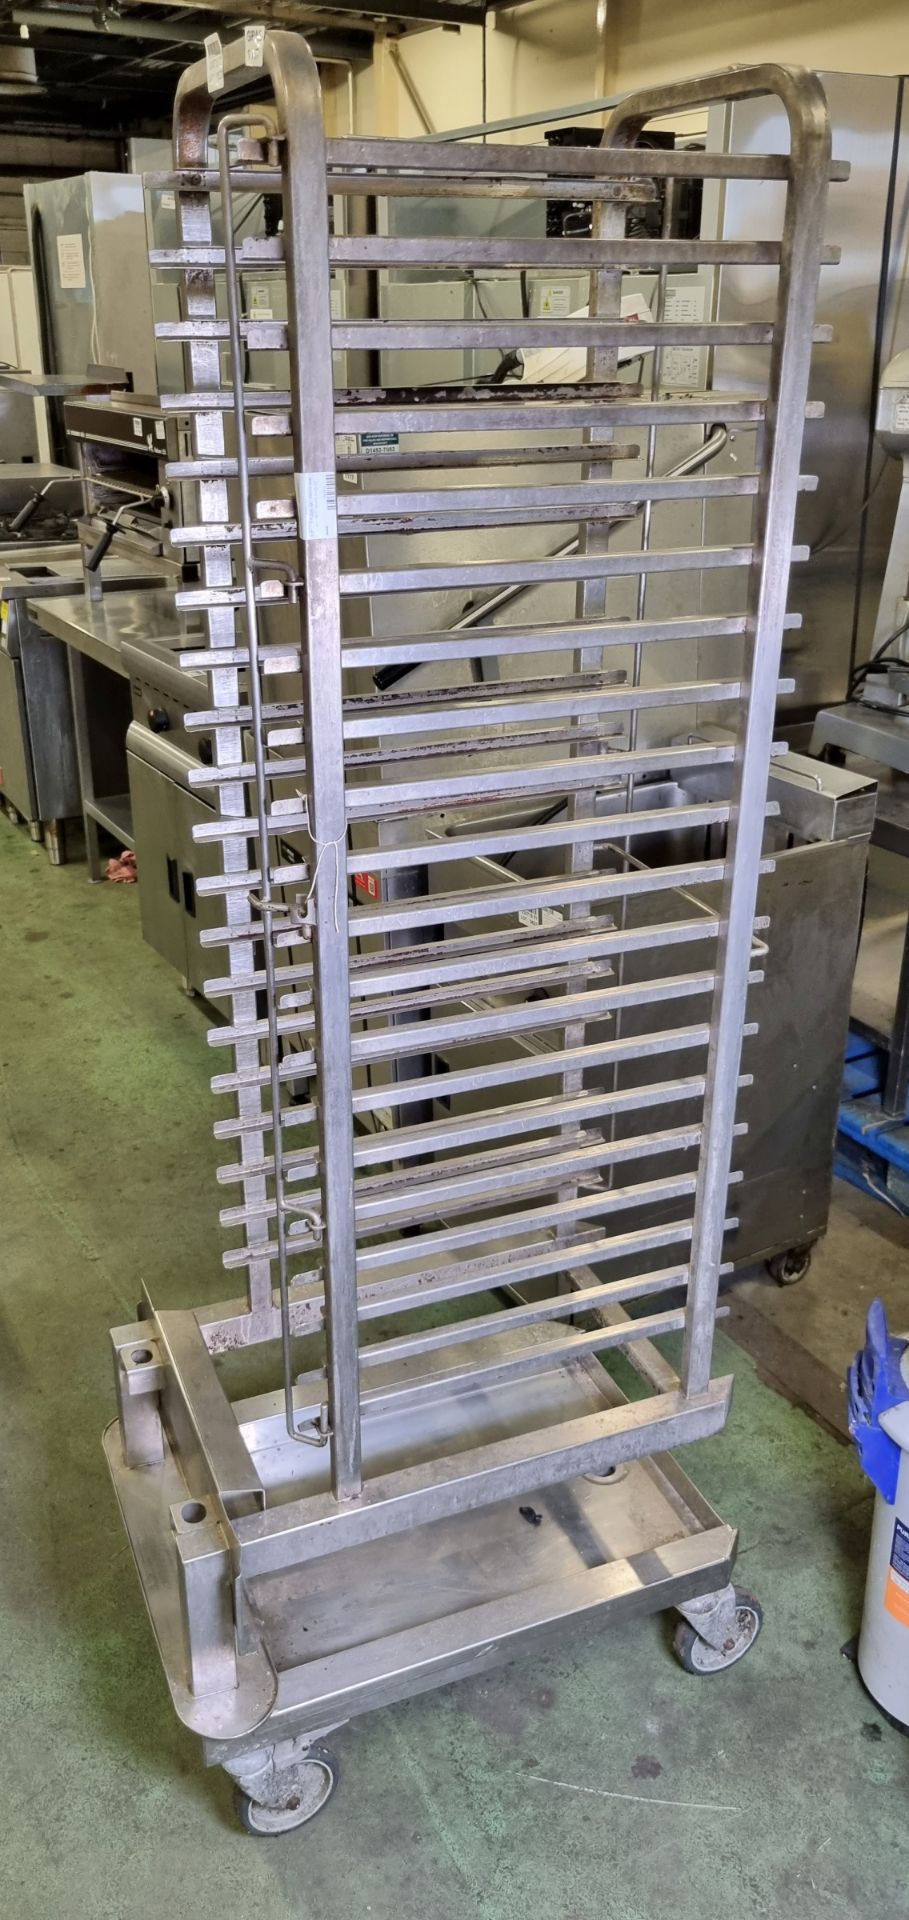 20 Grid combi oven roll in rack trolley - W 500 x D 710 x H 1800 - Image 2 of 2